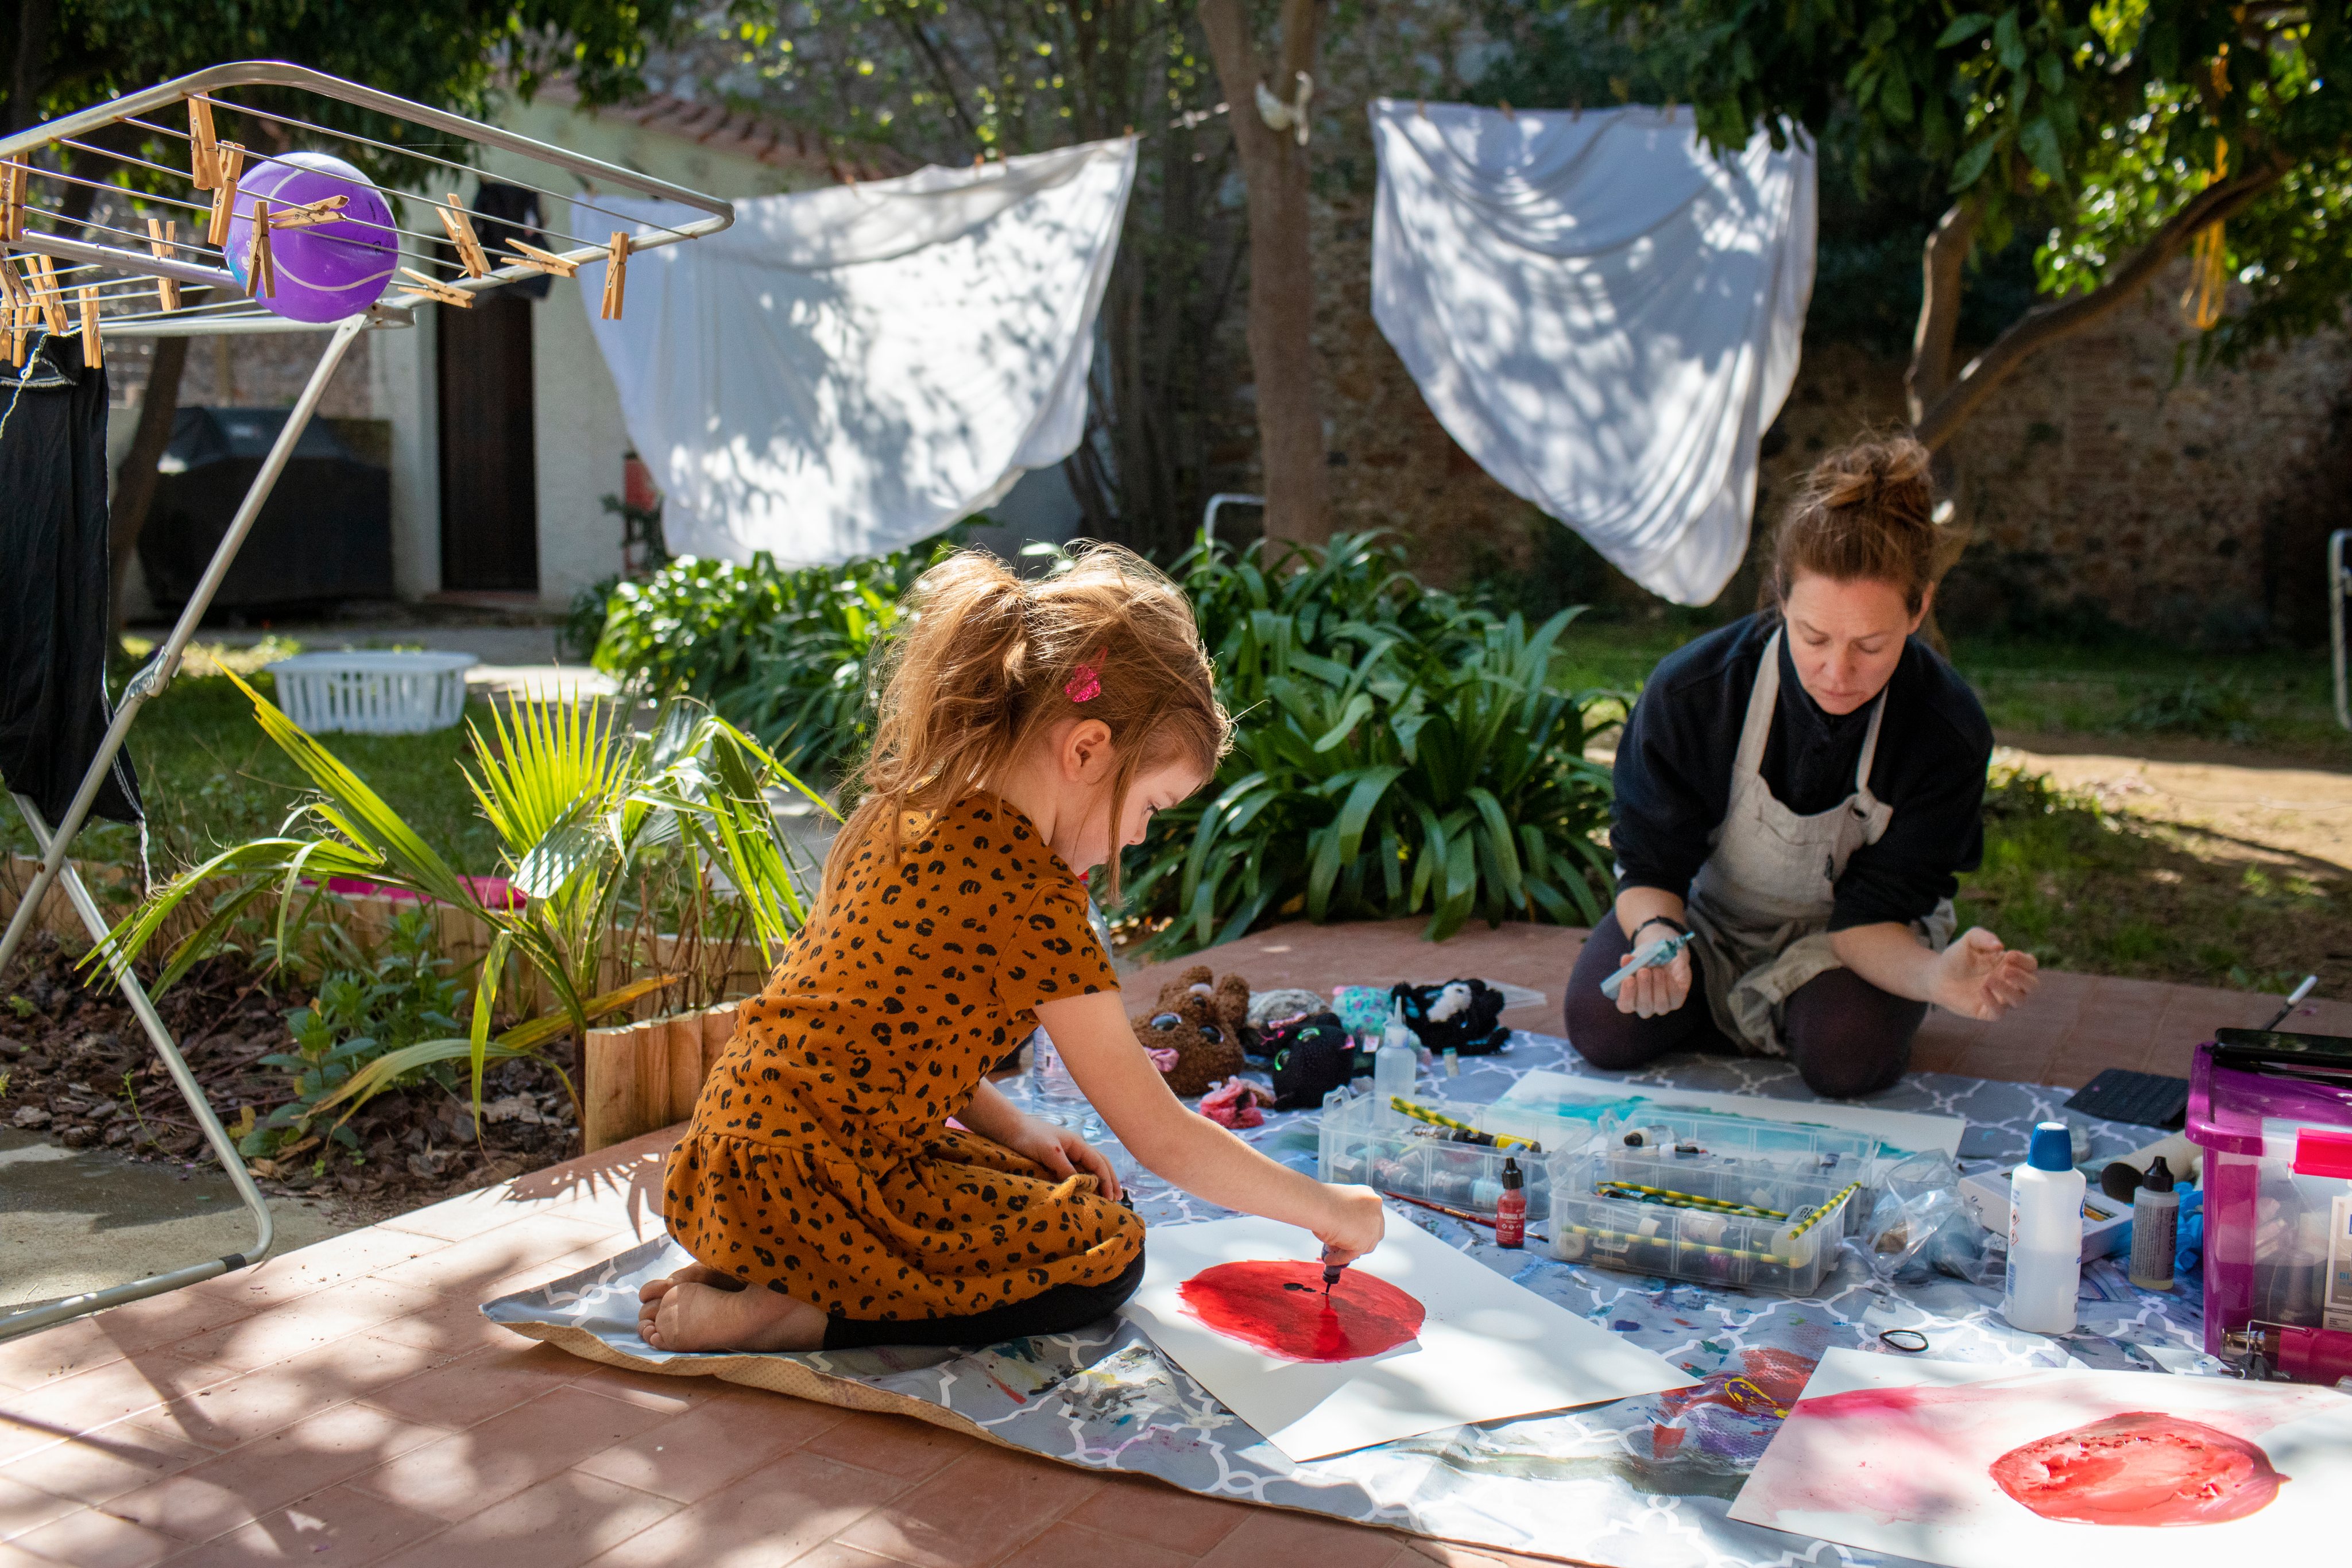 A mother and daughter performing artwork during home schooling.